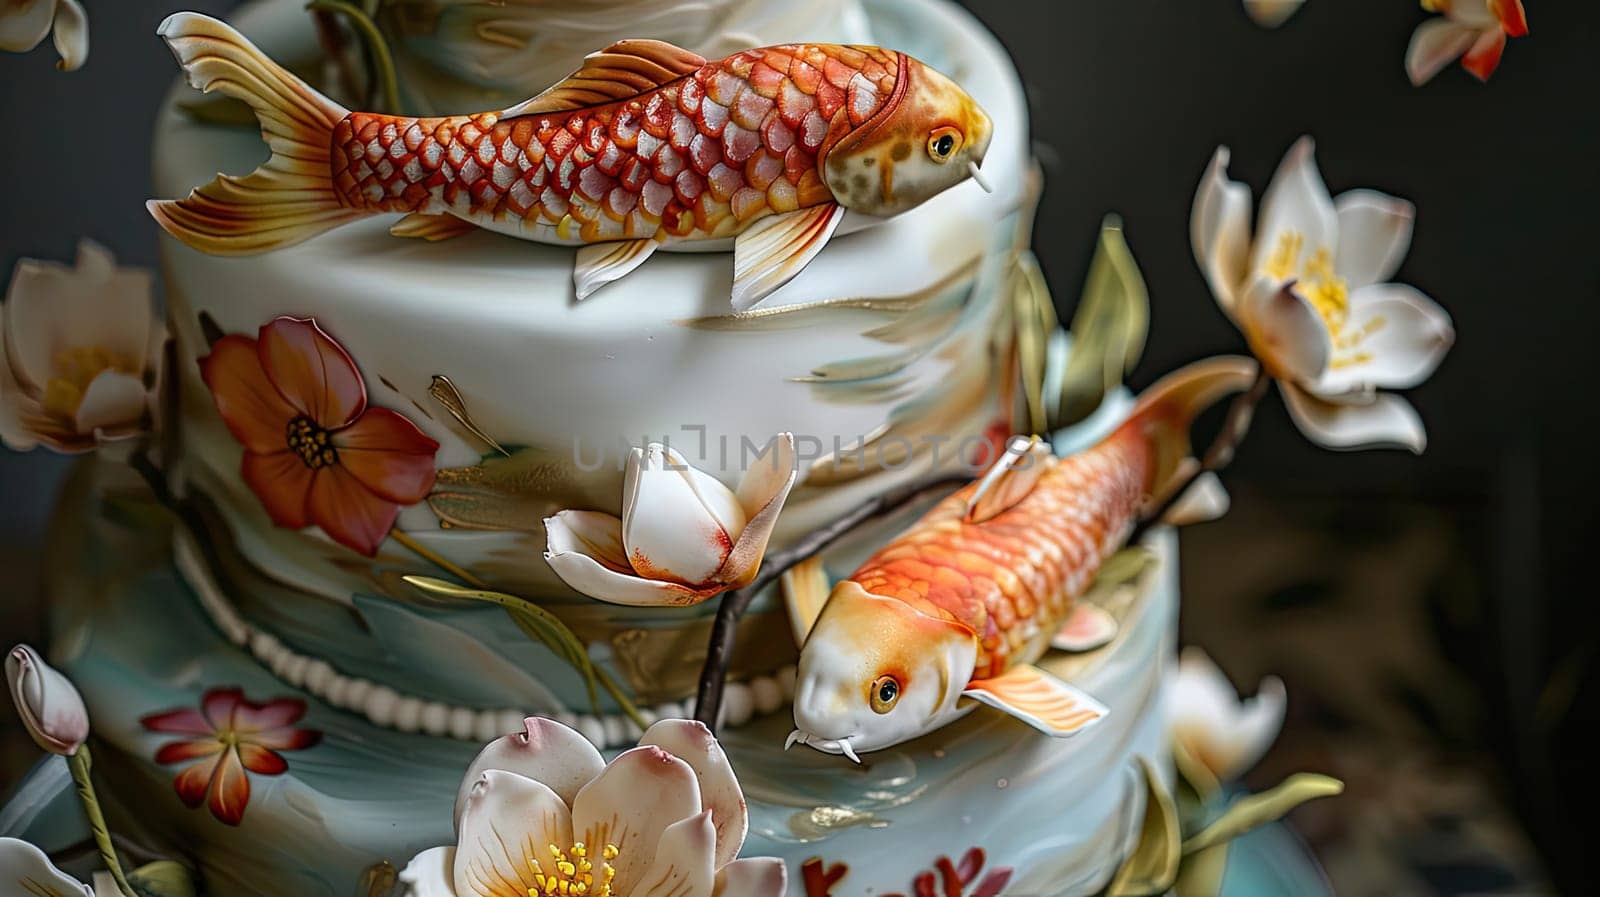 A three-tiered cake adorned with intricate fish and flower decorations.